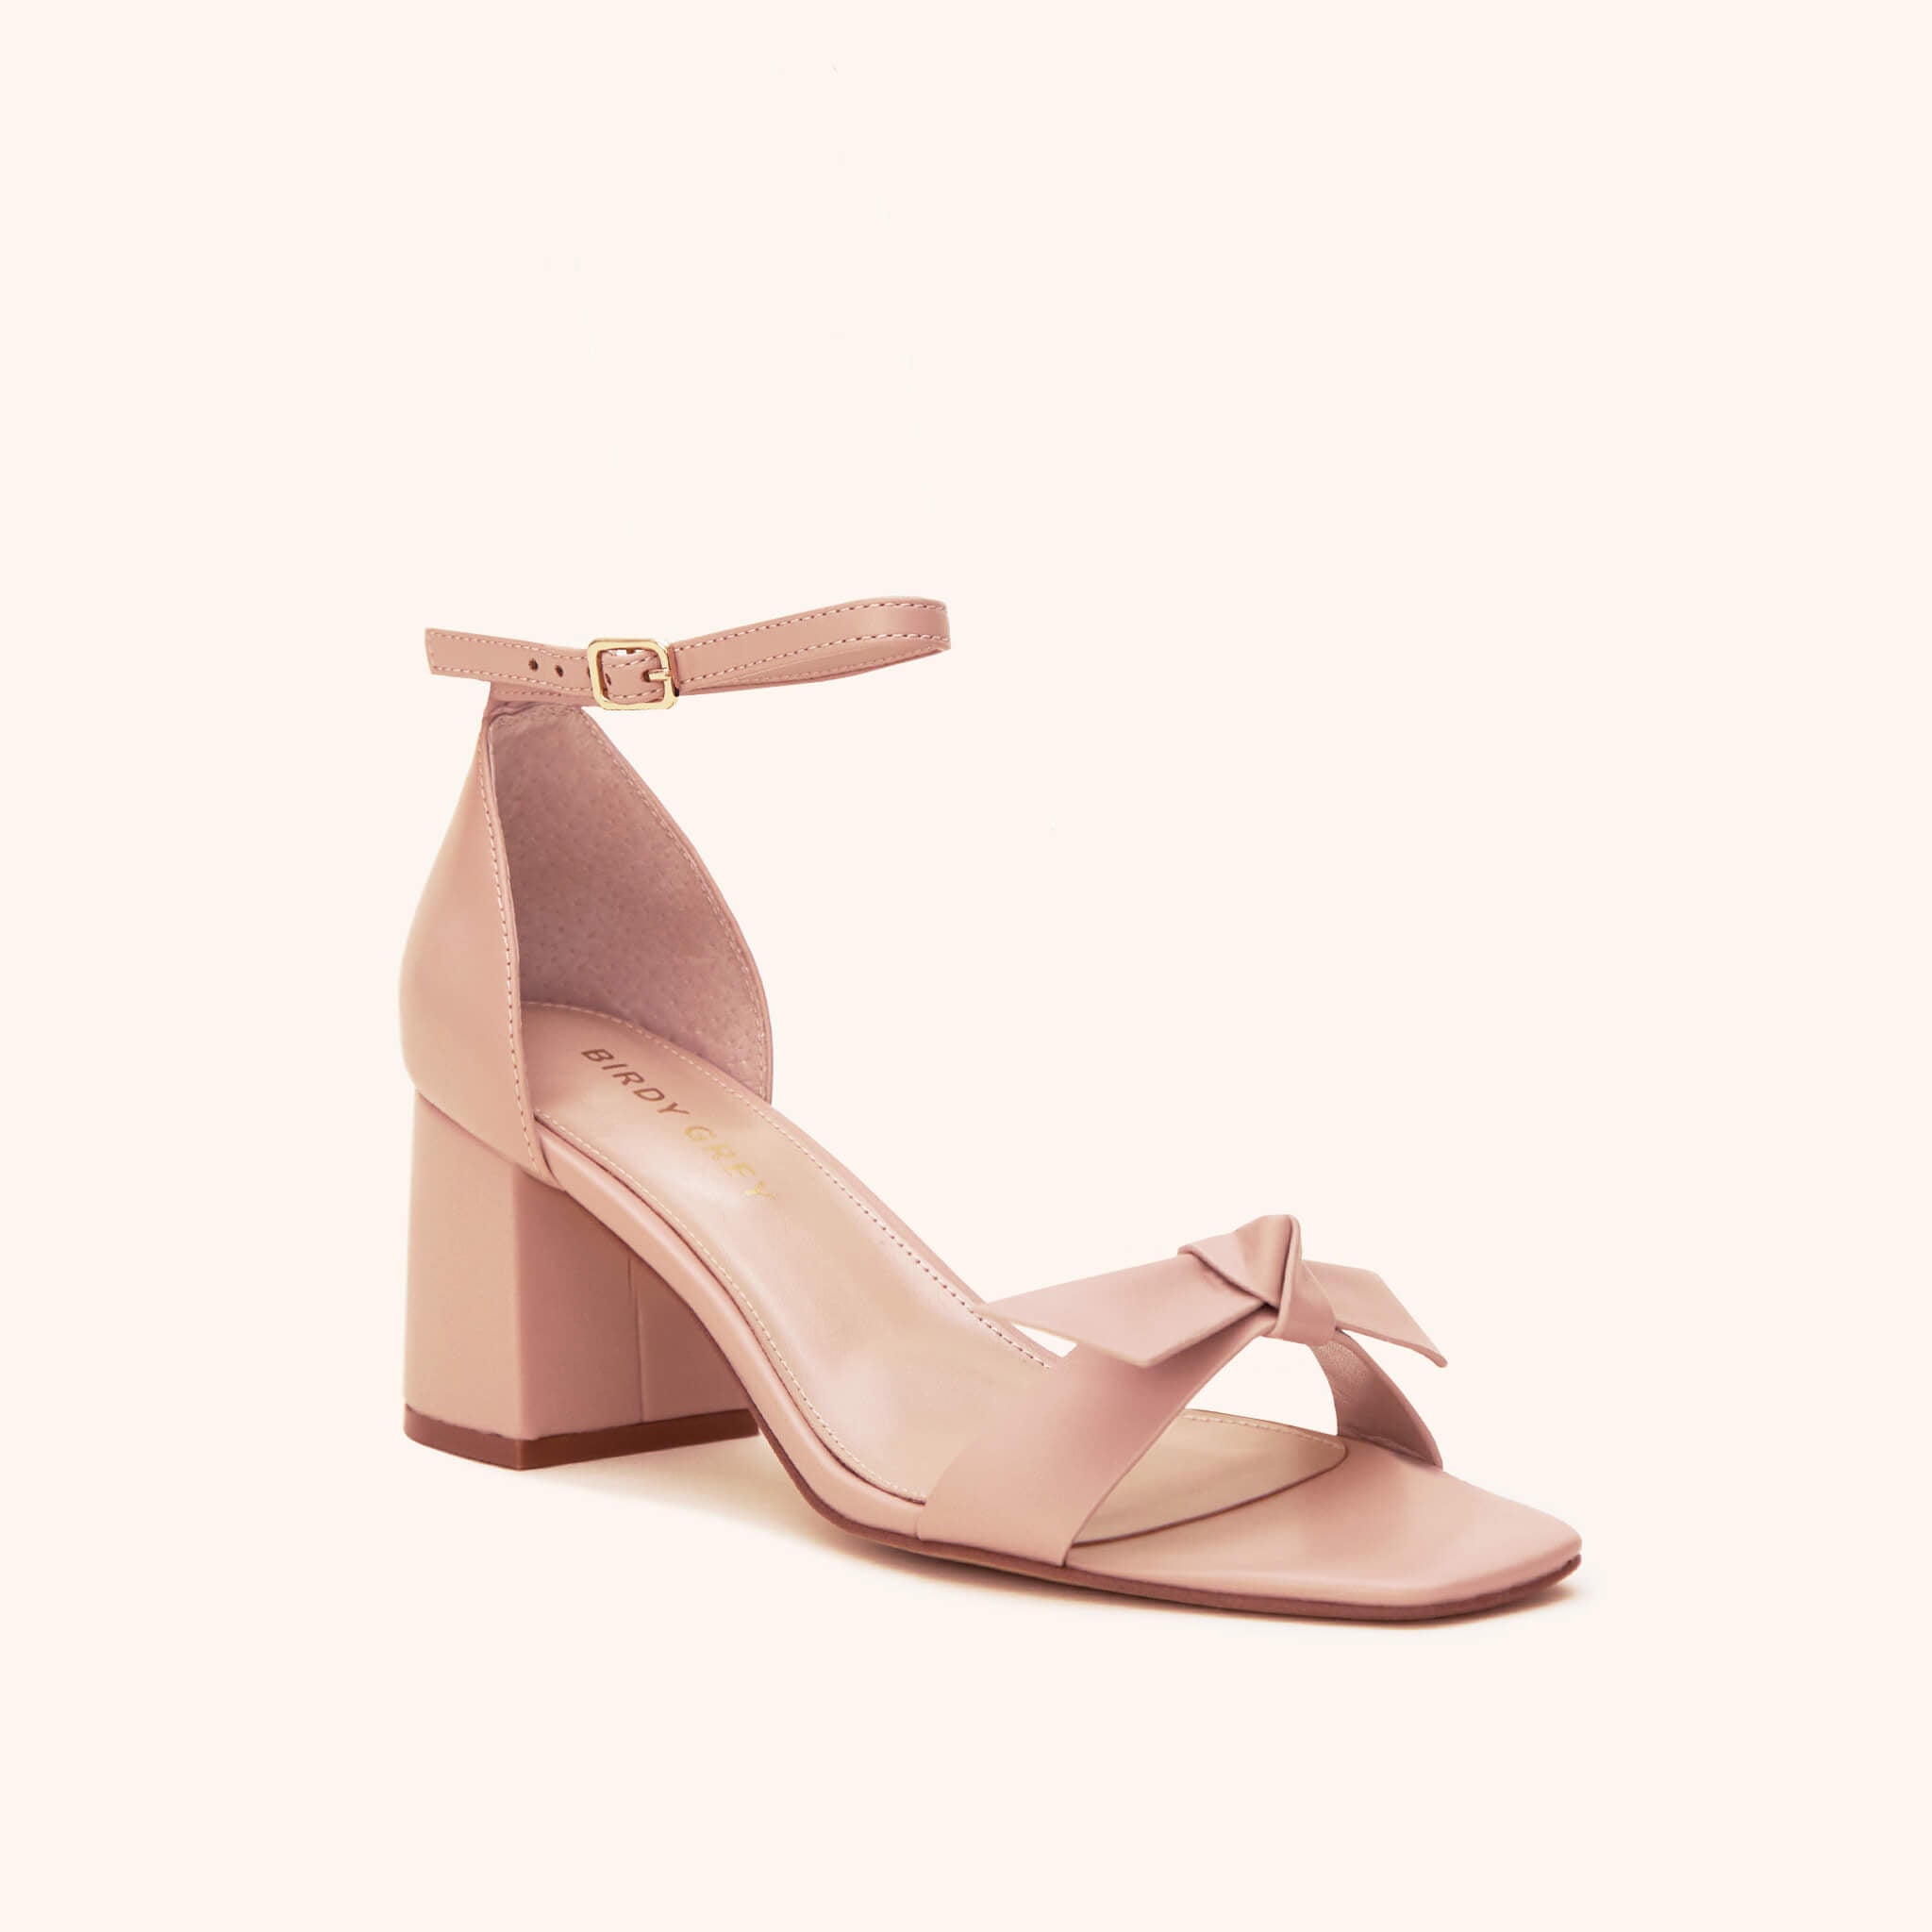 Elle Chunky Heel in Nude Blush by Birdy Grey, side view